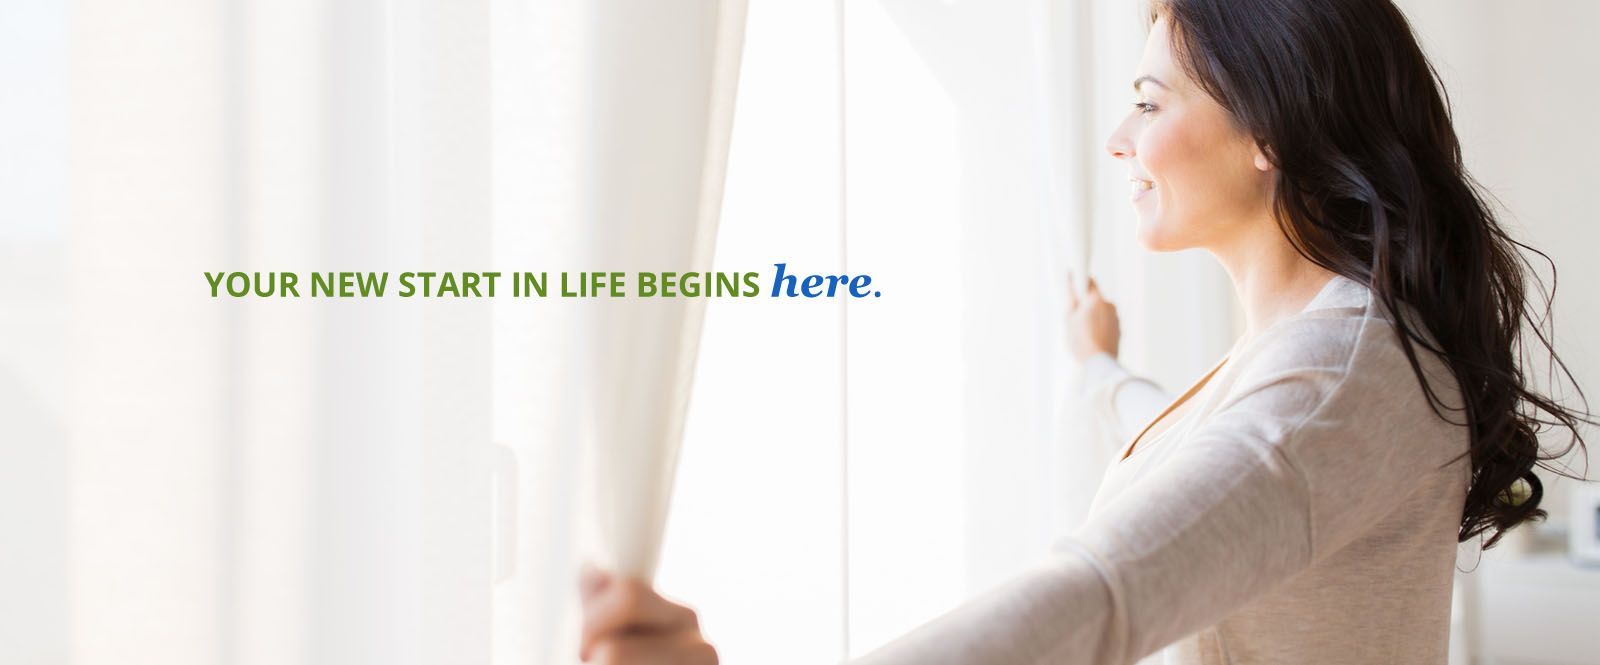 a woman is opening a window with a quote that says `` your new start in life begins here '' .